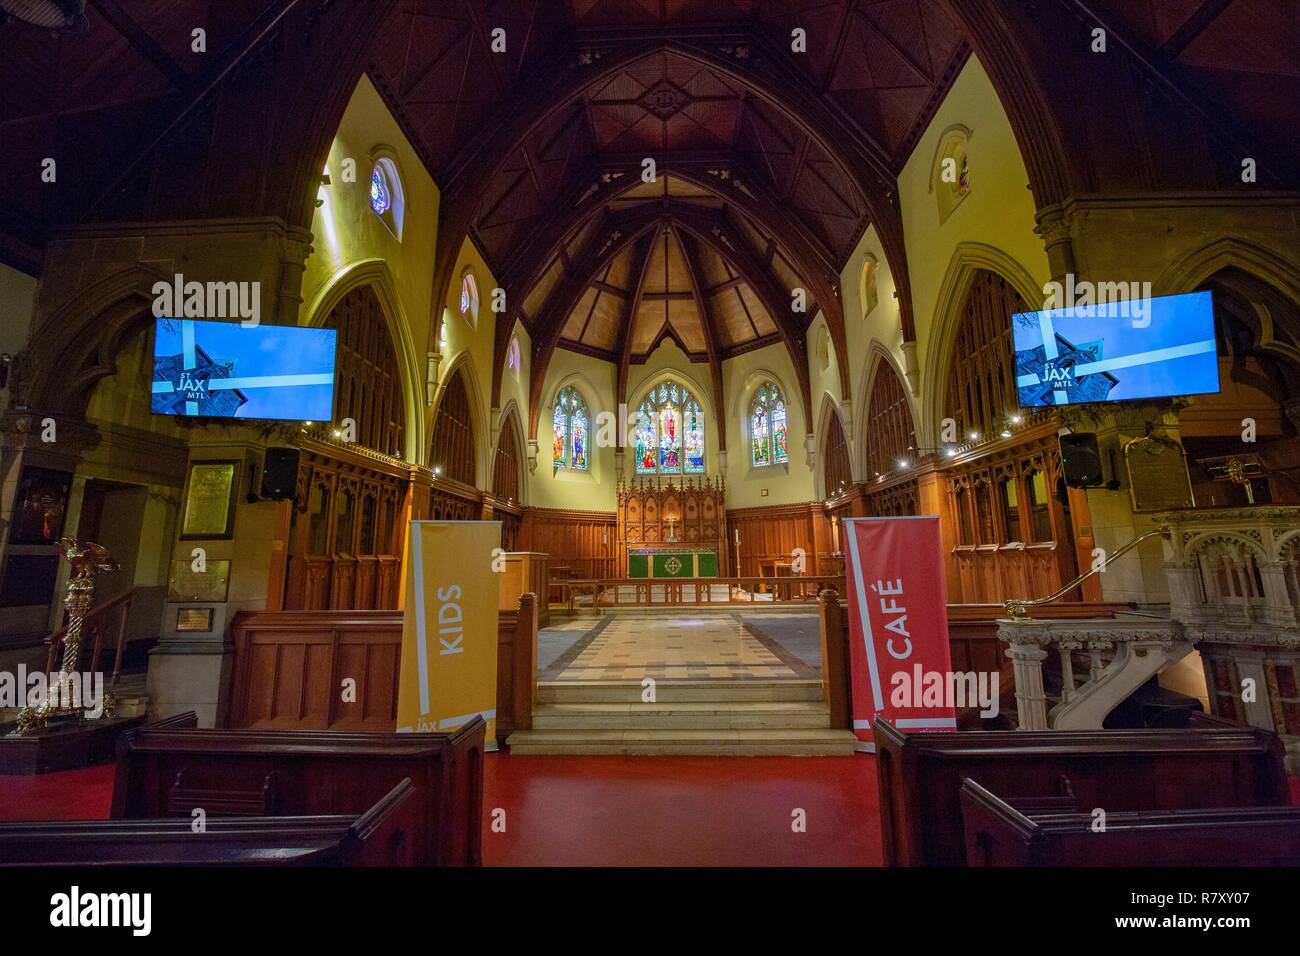 Canada, Quebec province, Montreal, Religious Heritage, Saint-Jax Anglican Church Stock Photo